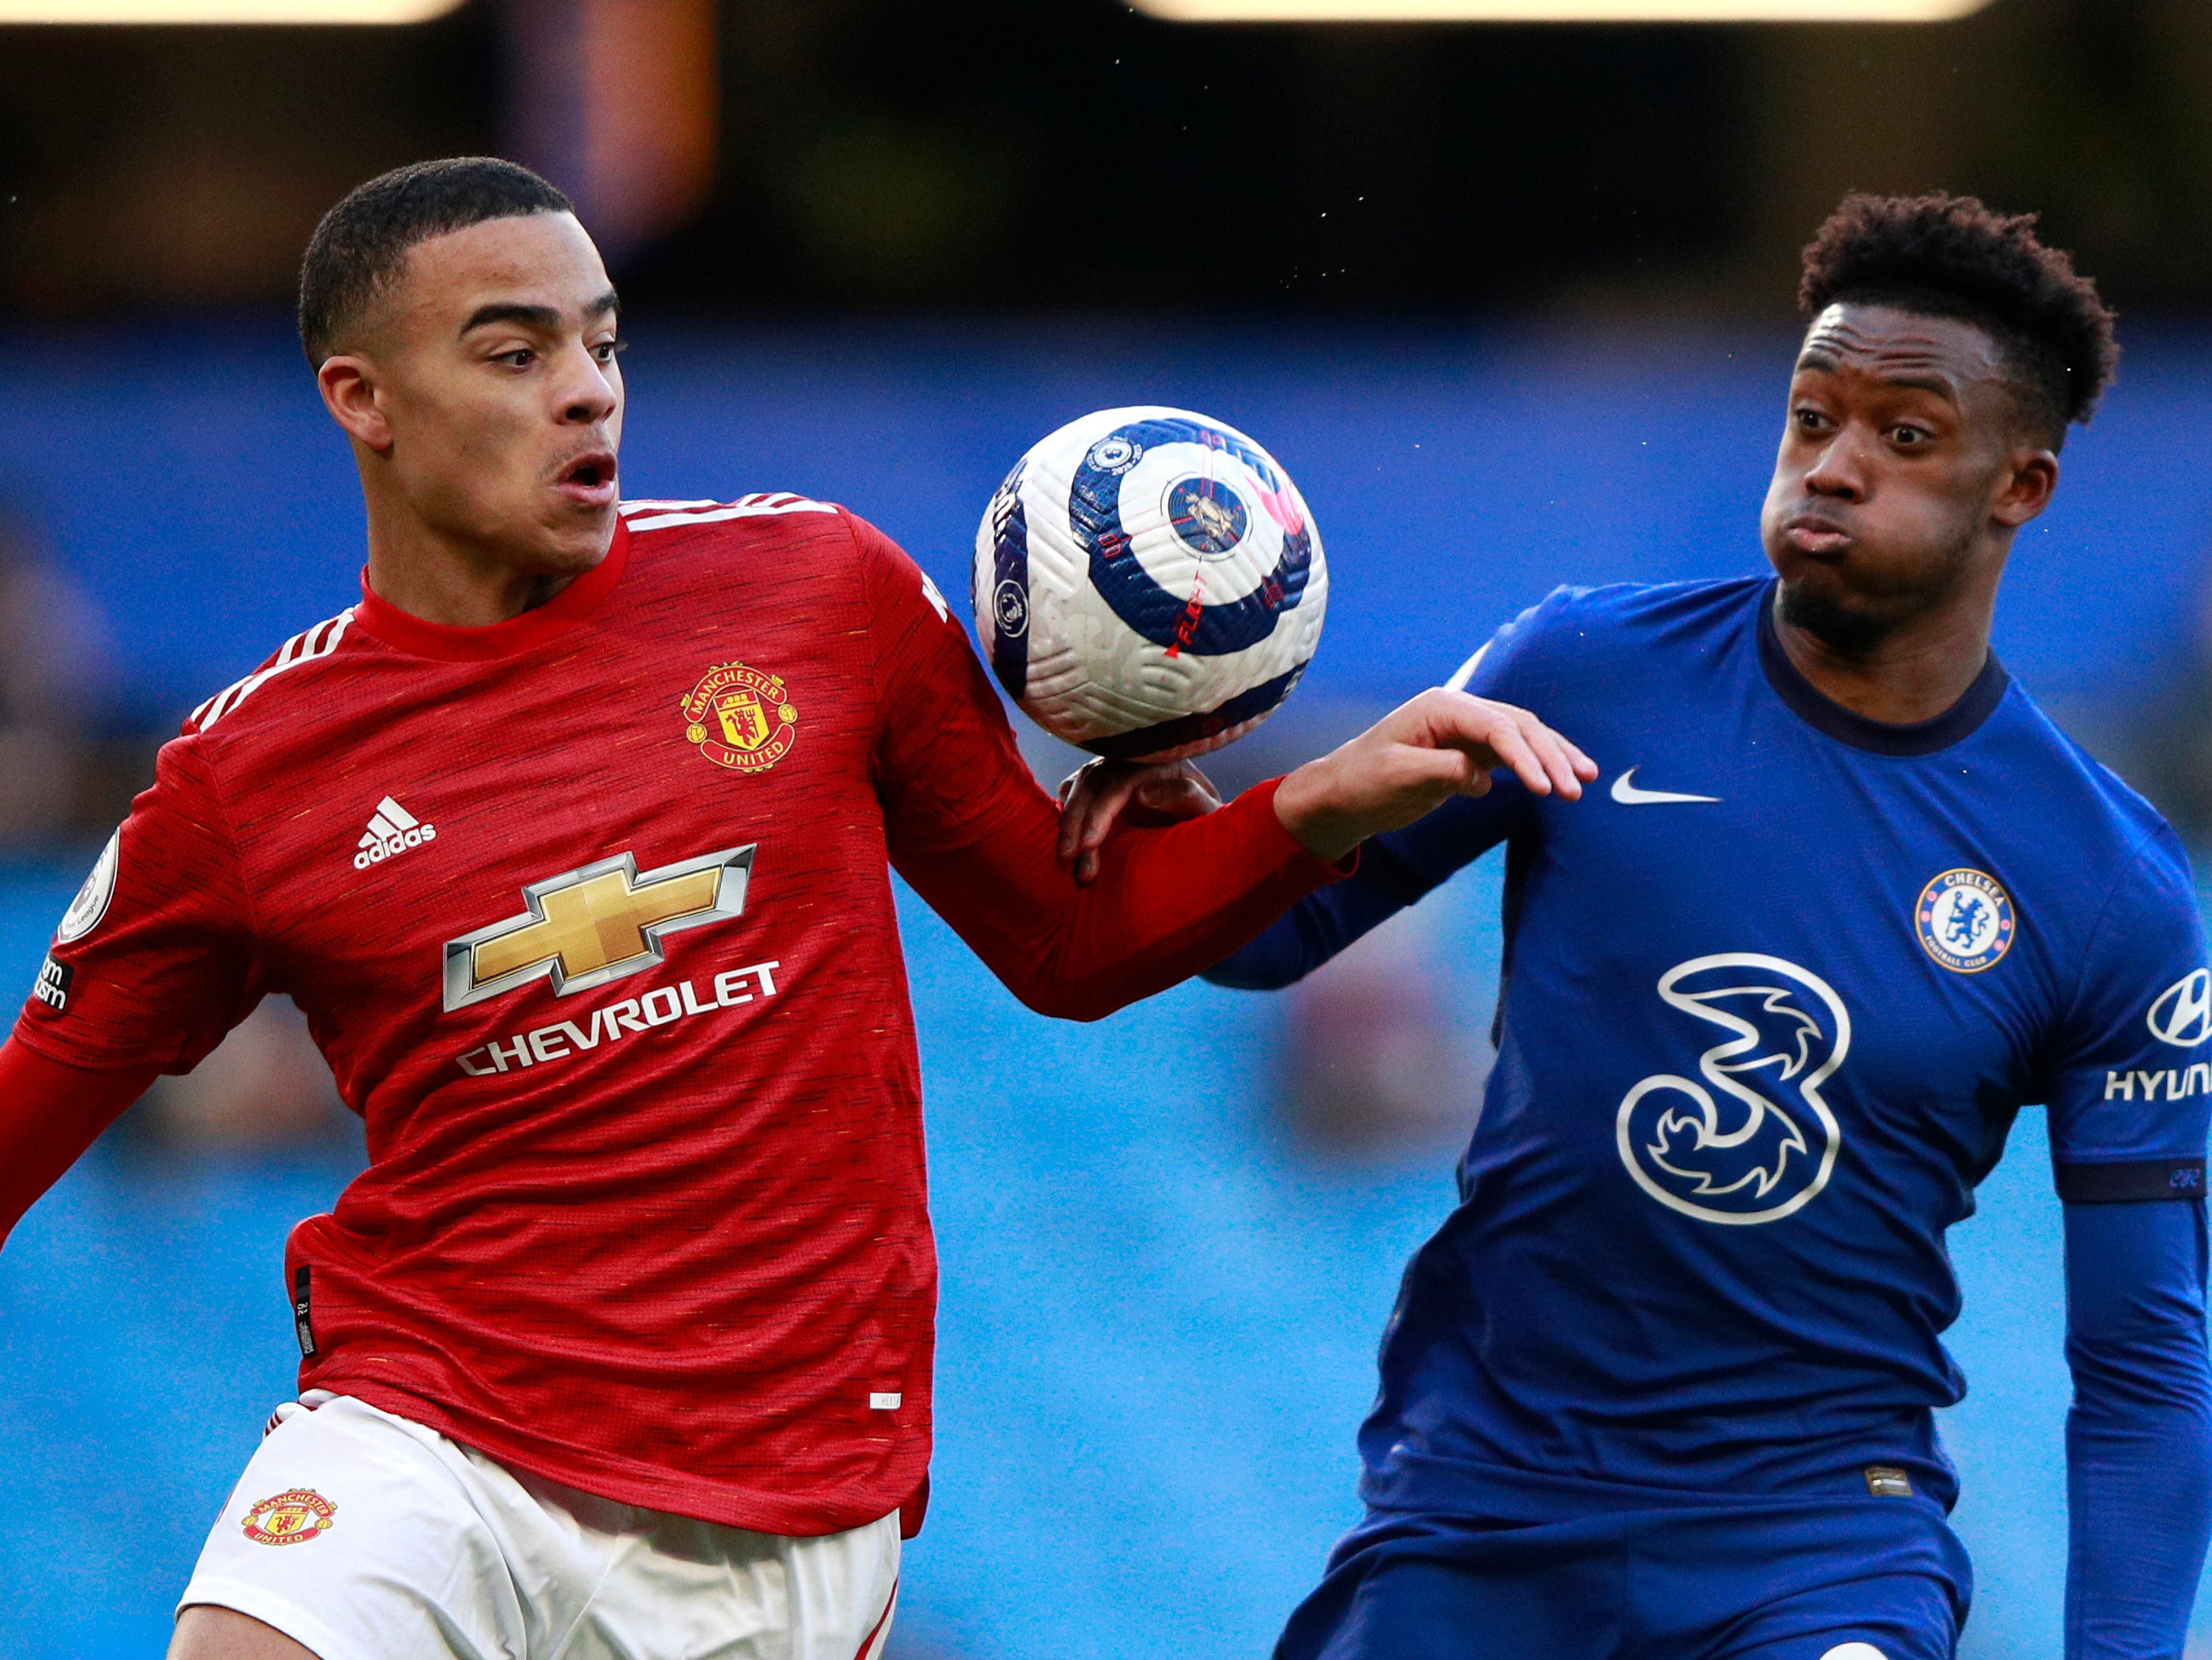 Chelsea’s Callum Hudson-Odoi, right, under pressure from Man United’s Mason Greenwood, brushes his hand against the ball